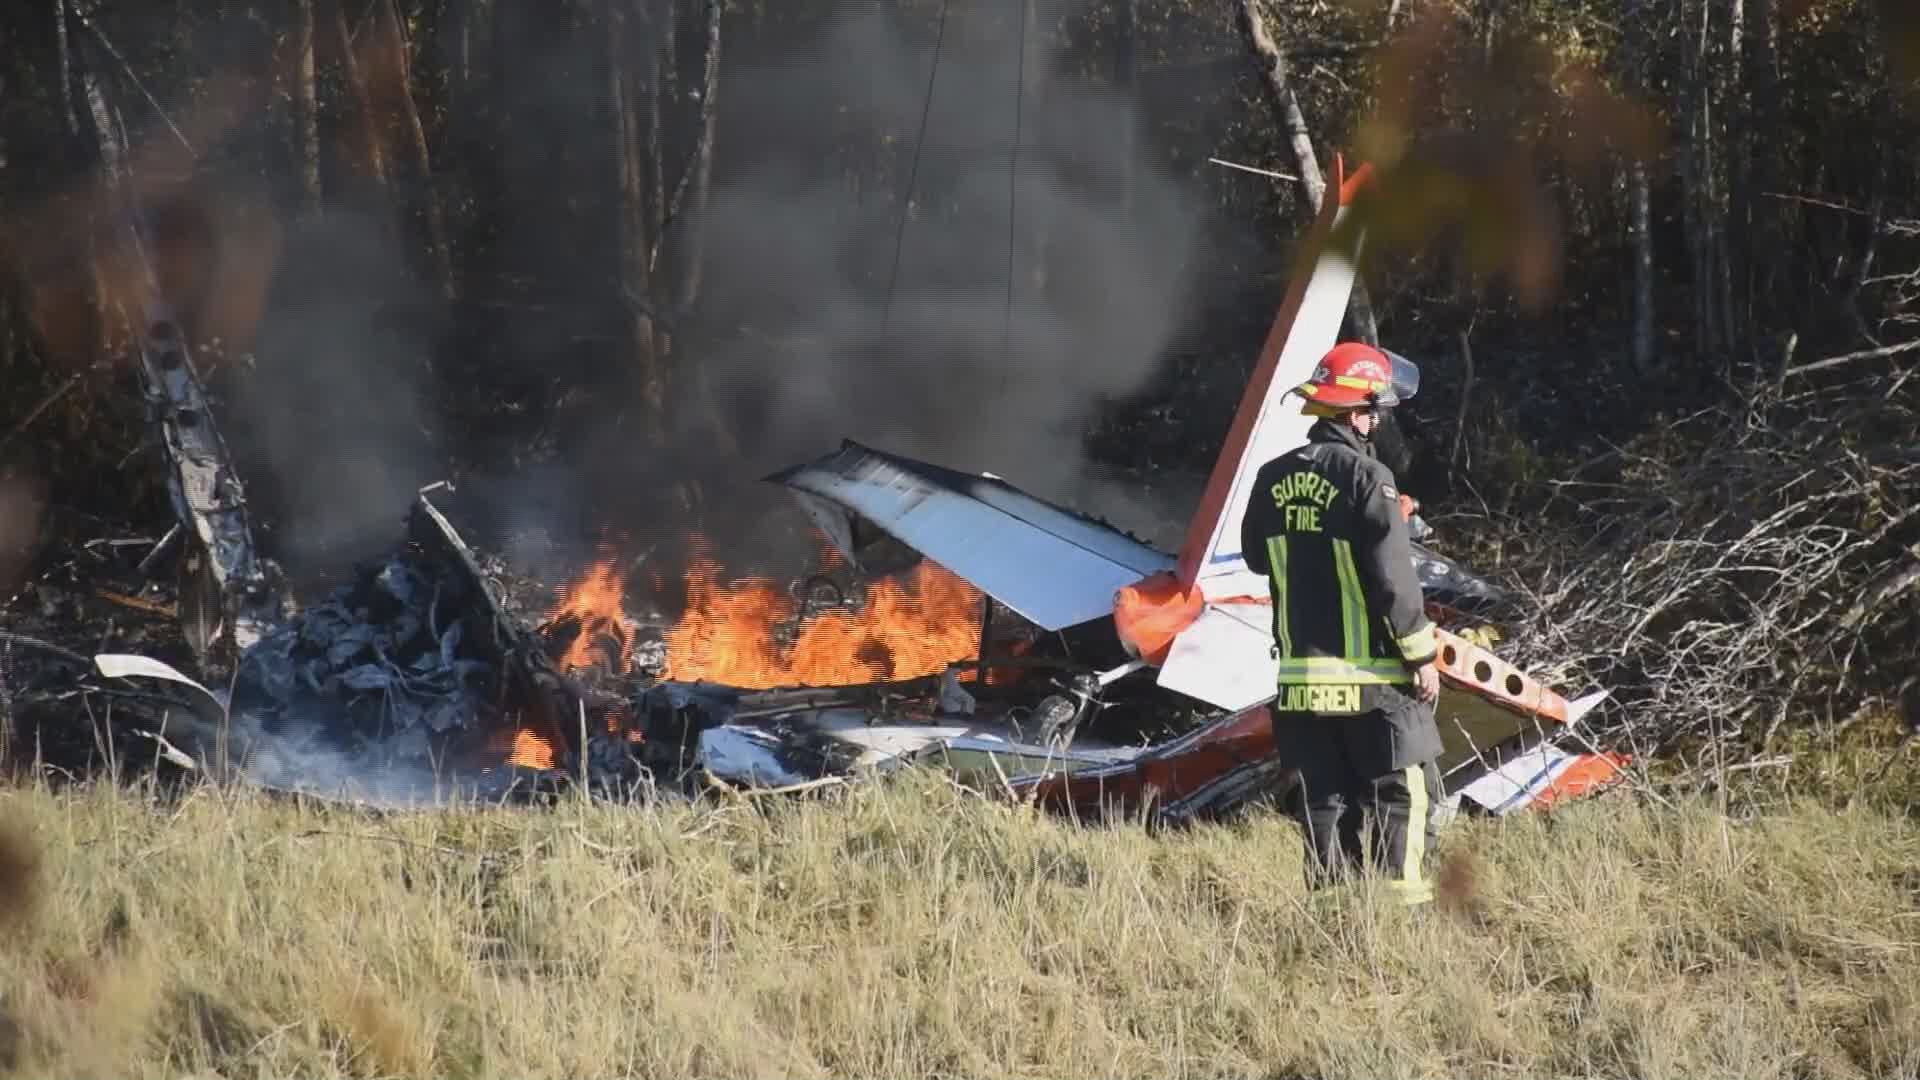 No serious injuries after small plane crashes in South Surrey: RCMP